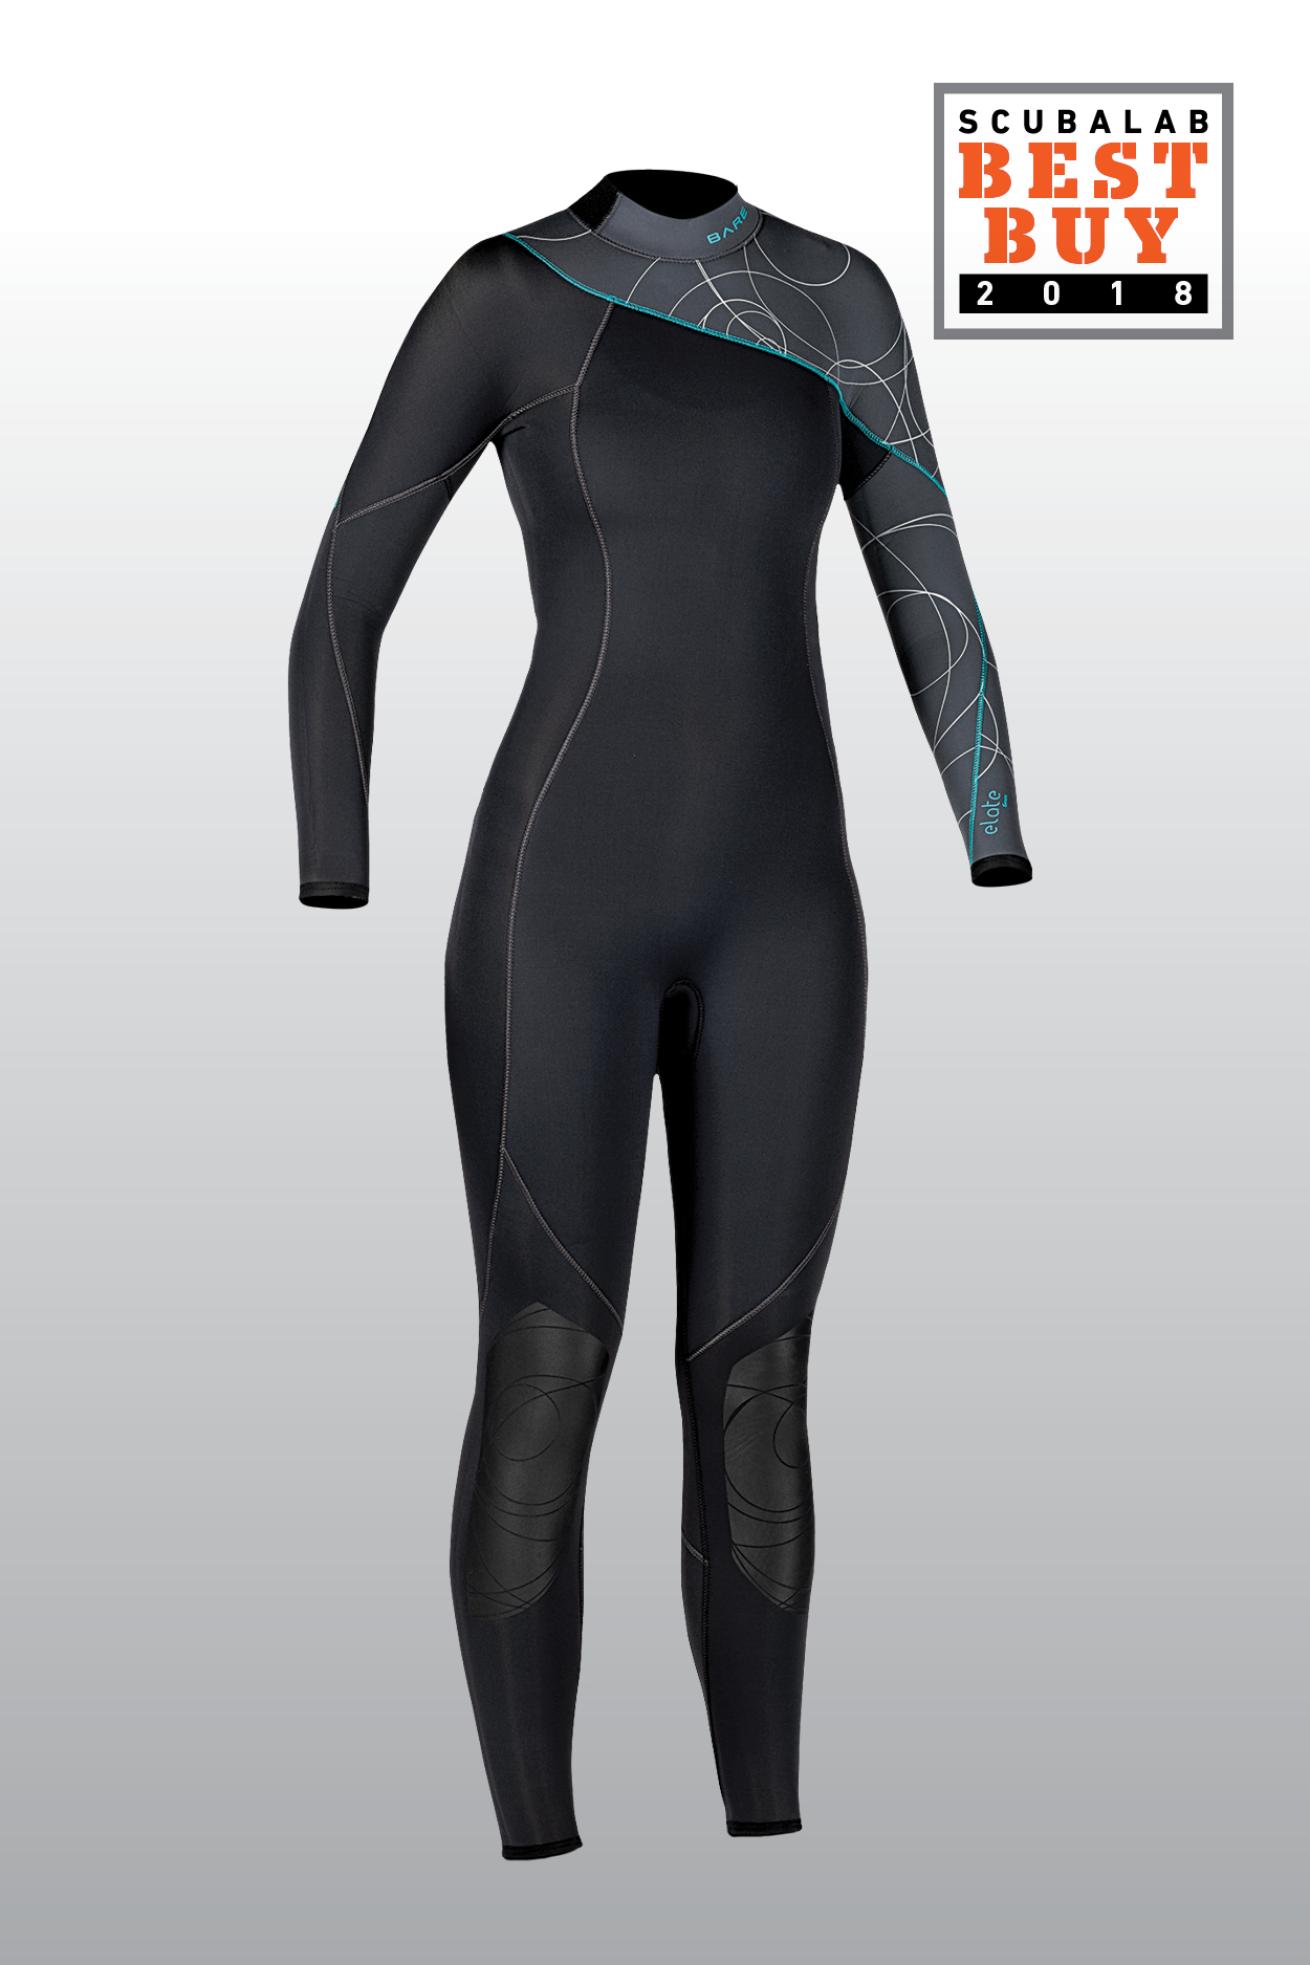 The Best 5 mm Scuba Wetsuits Reviewed by ScubaLab | Scuba Diving